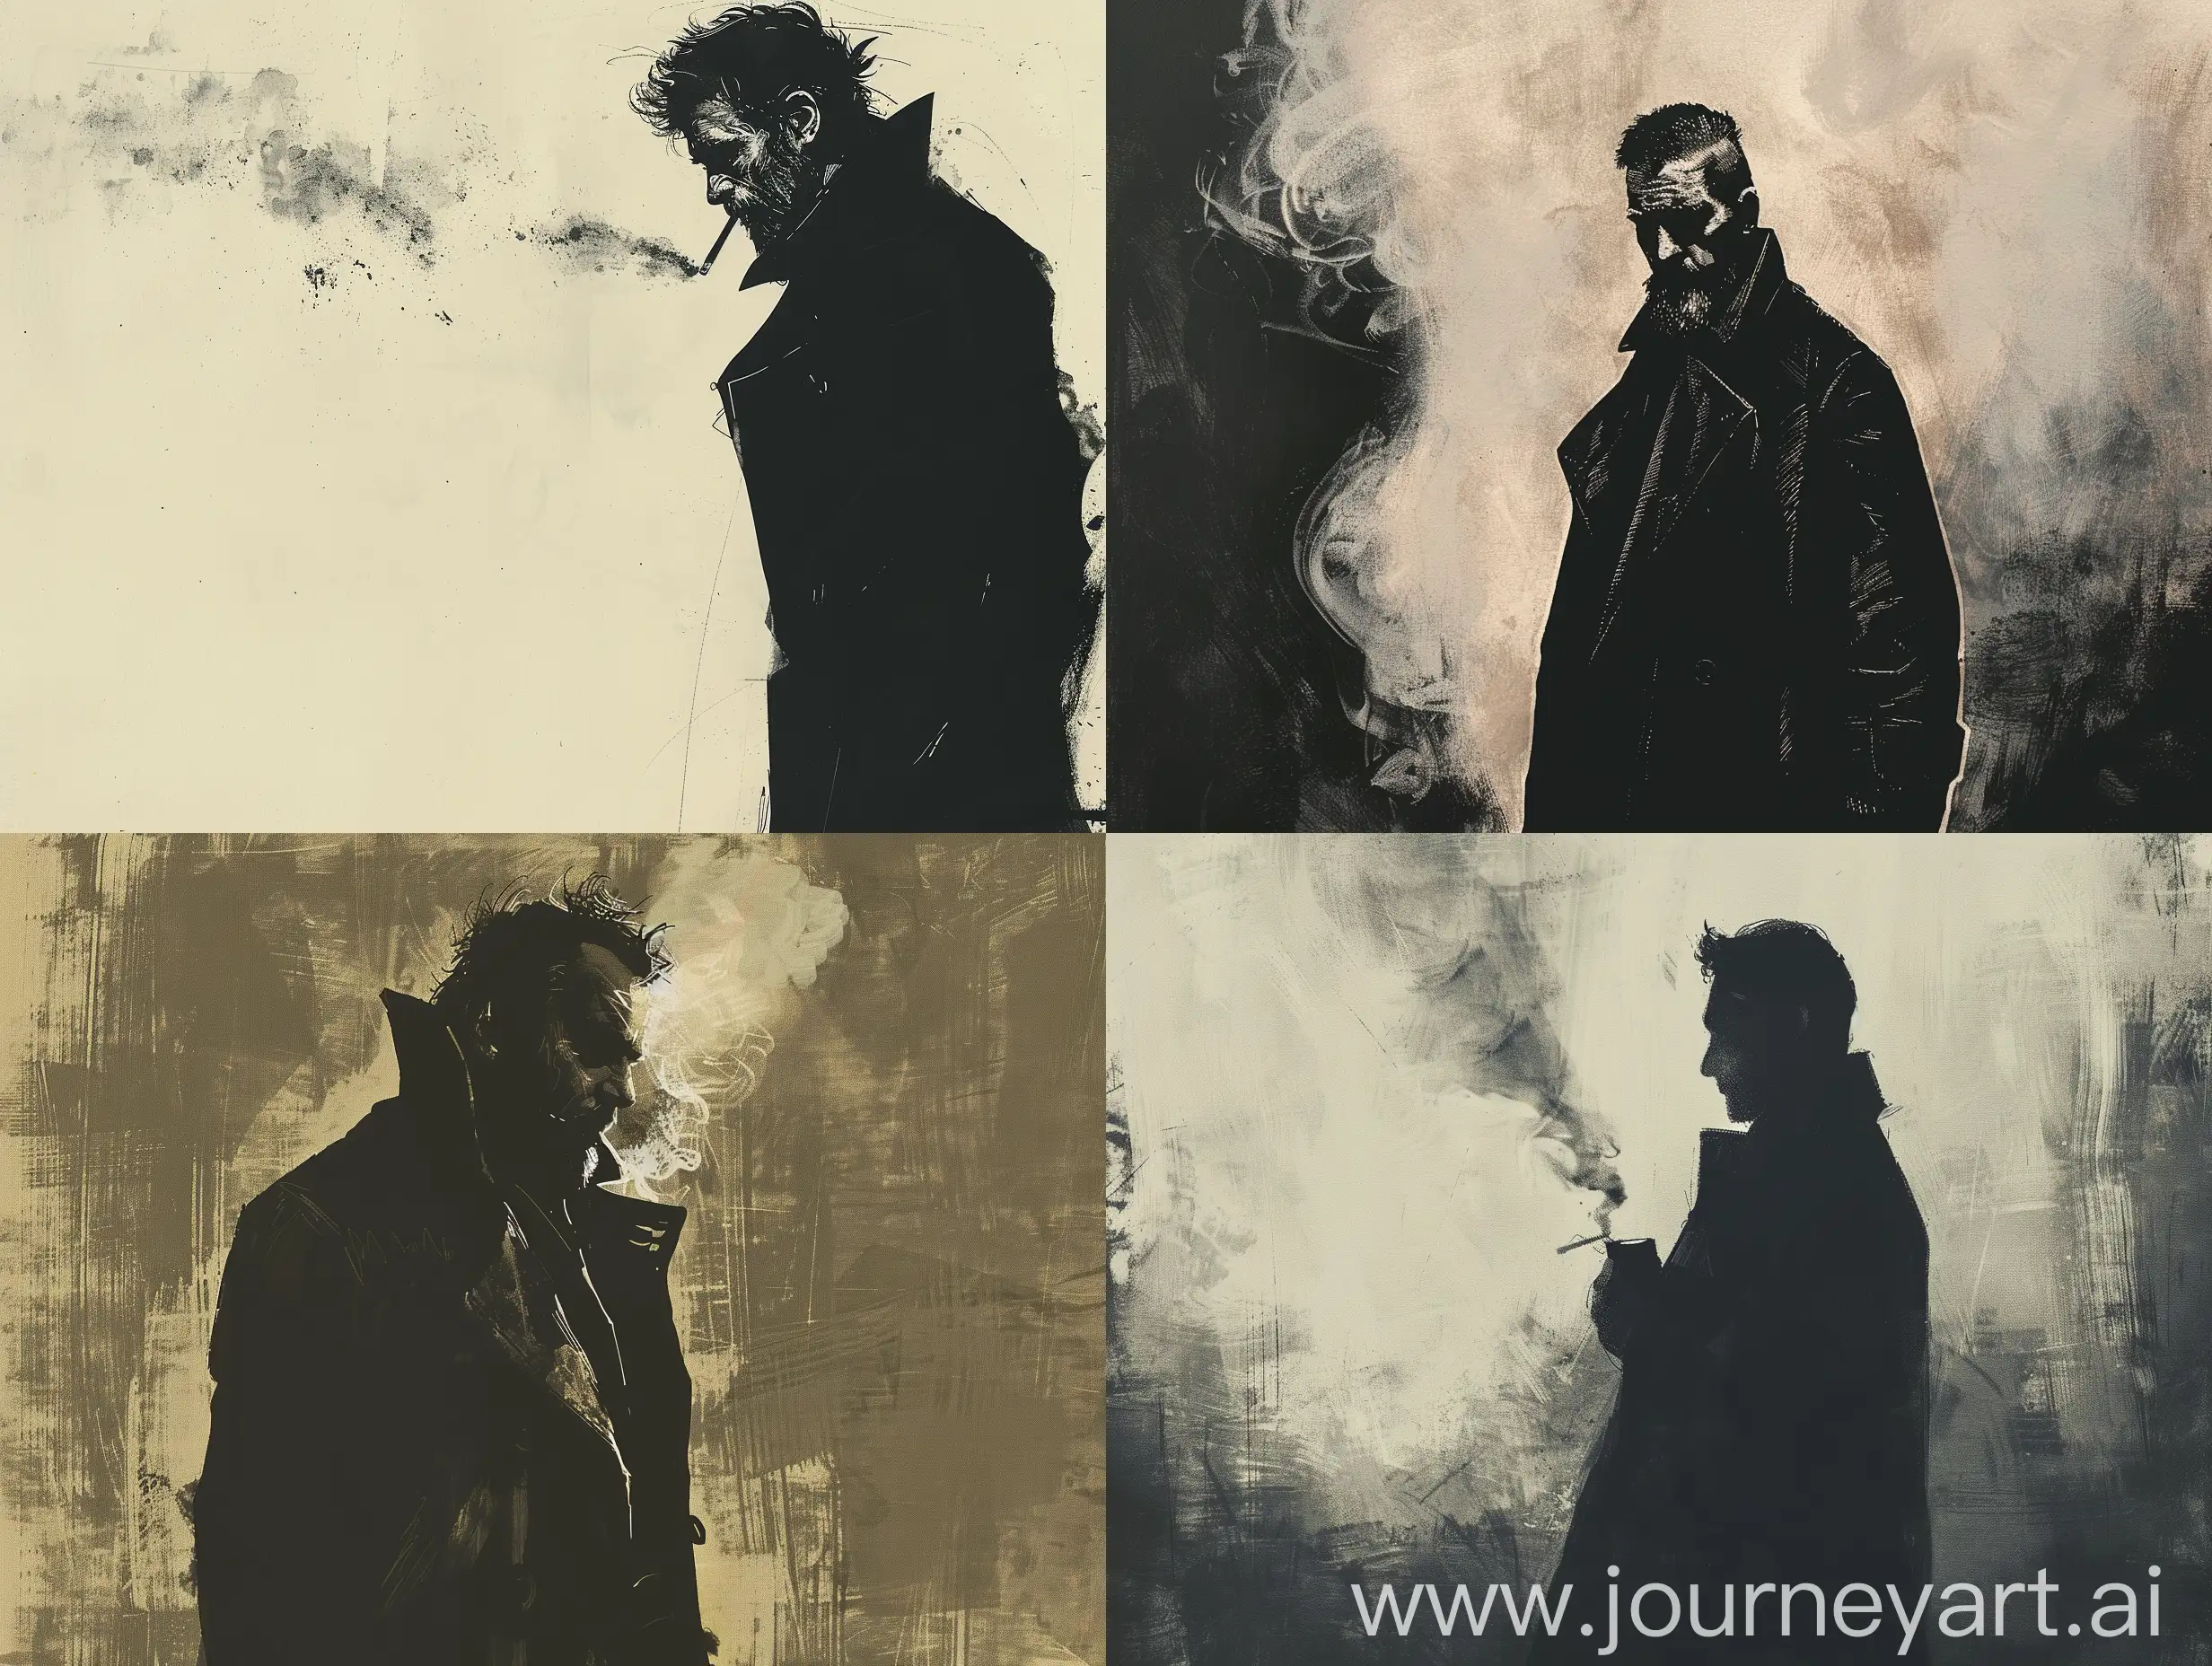 Middle-Aged-Man-in-Black-Trenchcoat-Smoking-in-Shadowy-Alley-Minimalist-Concept-Art